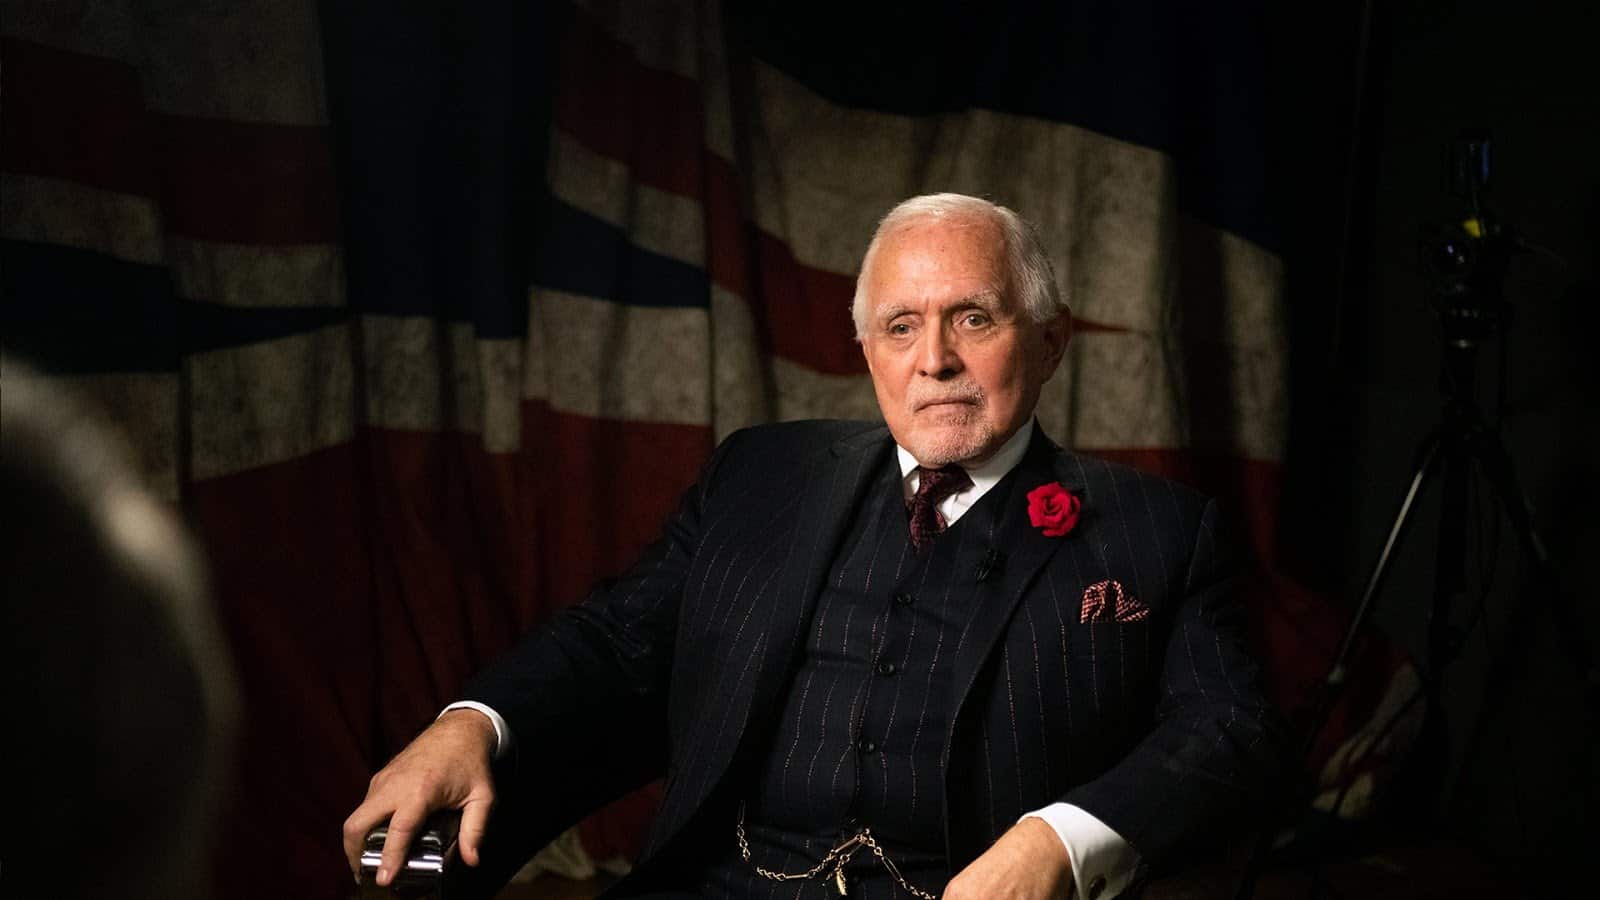 Dan Pena Net Worth 2022 : Know The Exciting Details!